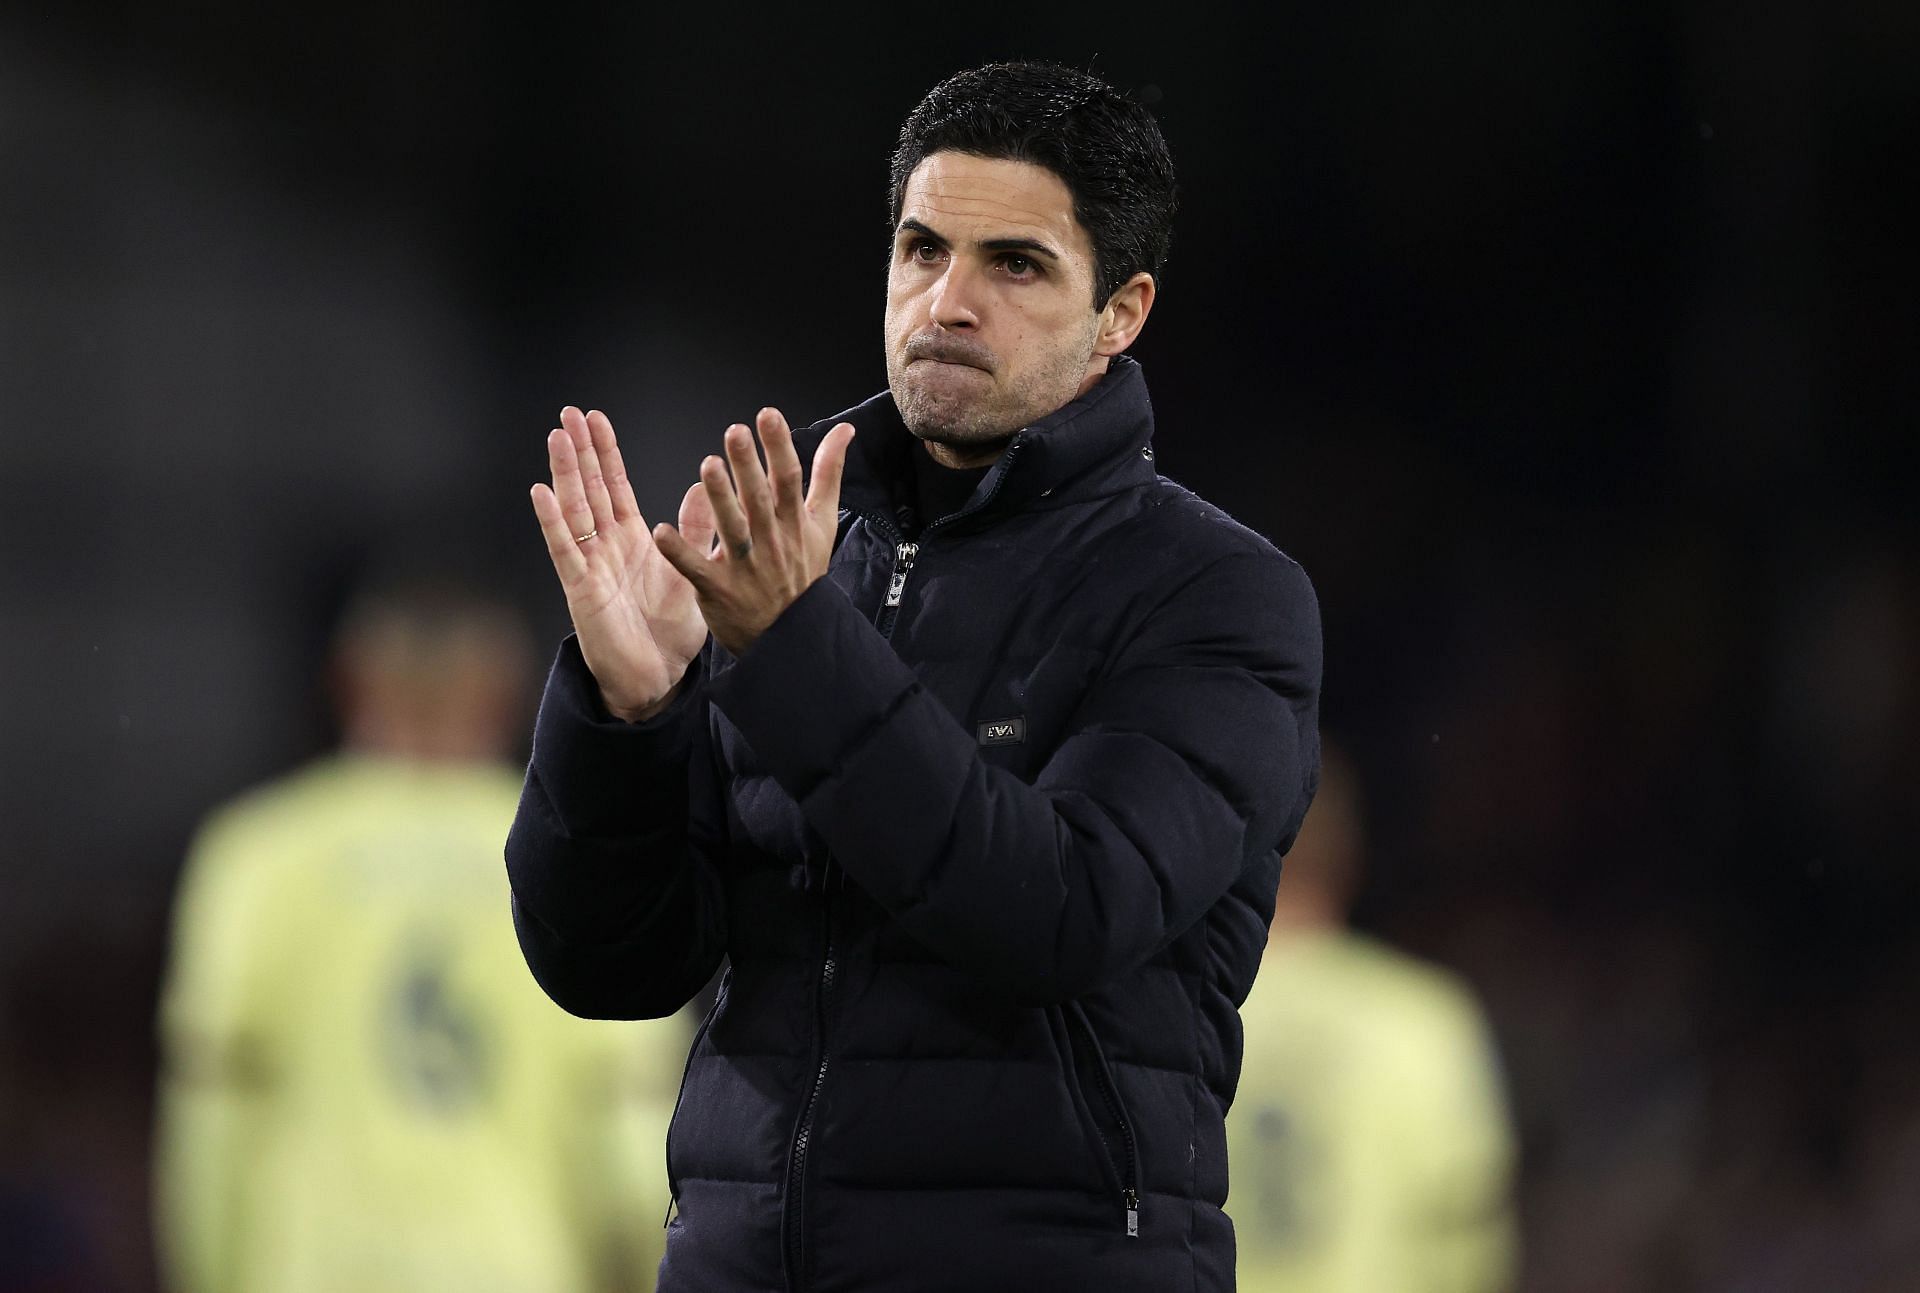 Arsenal manager Mikel Arteta masterminded a superb win over Chelsea on Wednesday.